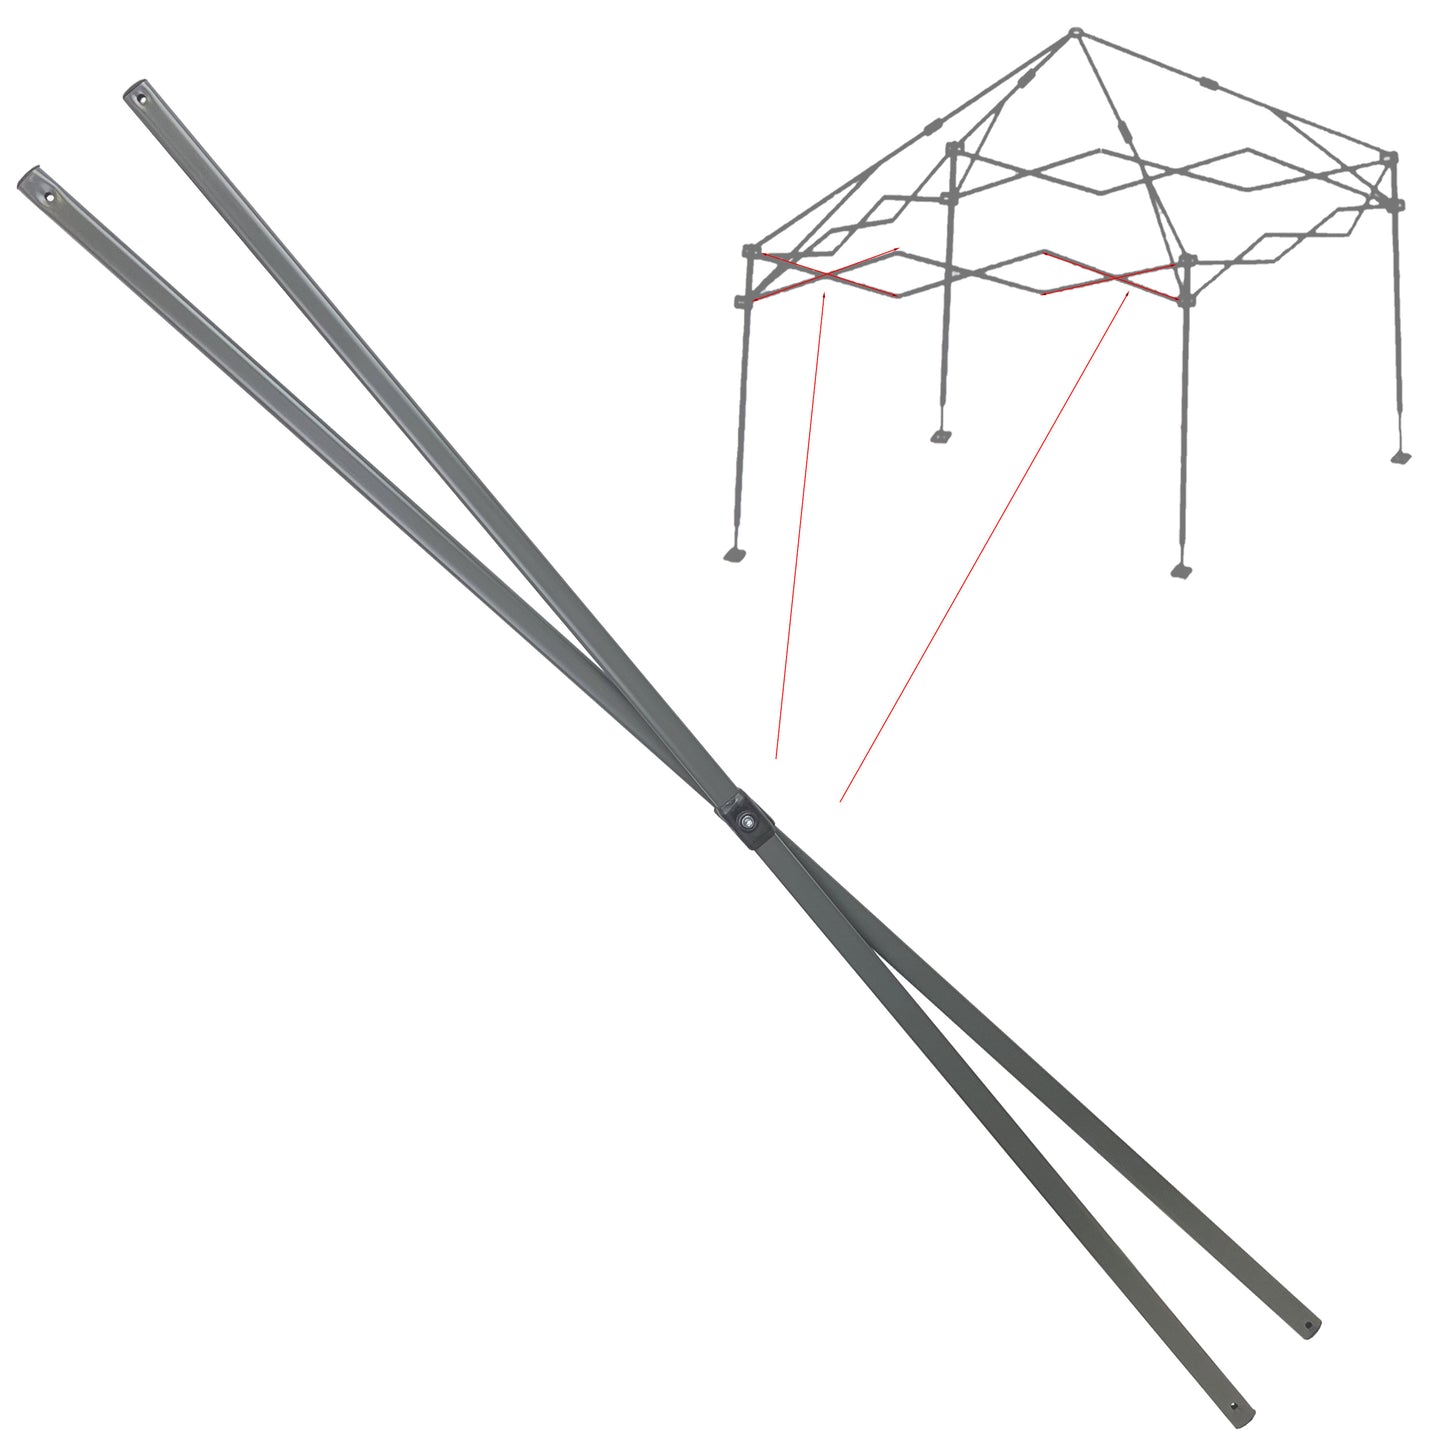 This image depicts a side truss bar, which is a component of an Ozark Trail 12' x 12' canopy frame. The truss bar appears to be a collapsible rod with two extendable parts, each ending with a hole probably for securing or joining with other parts. In the background, faded and out of focus, is the canopy structure this truss bar is a part of, with red lines indicating the position where this bar would fit within the frame. 